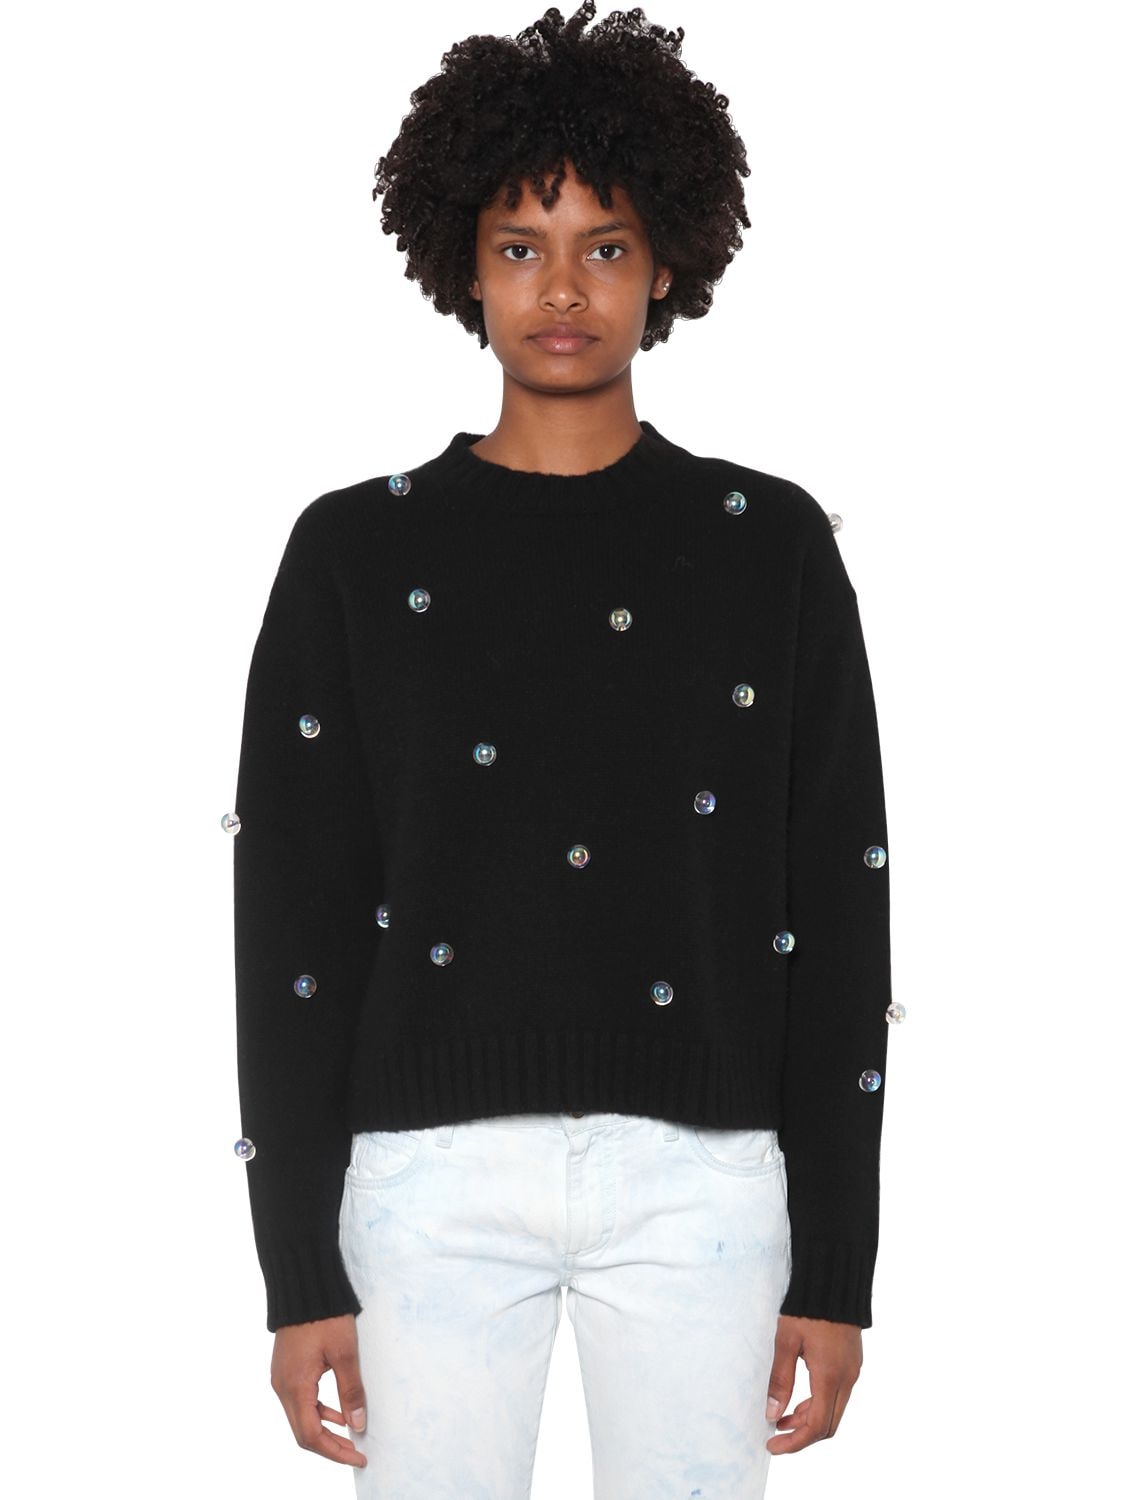 Embellished Wool & Cashmere Knit Sweater